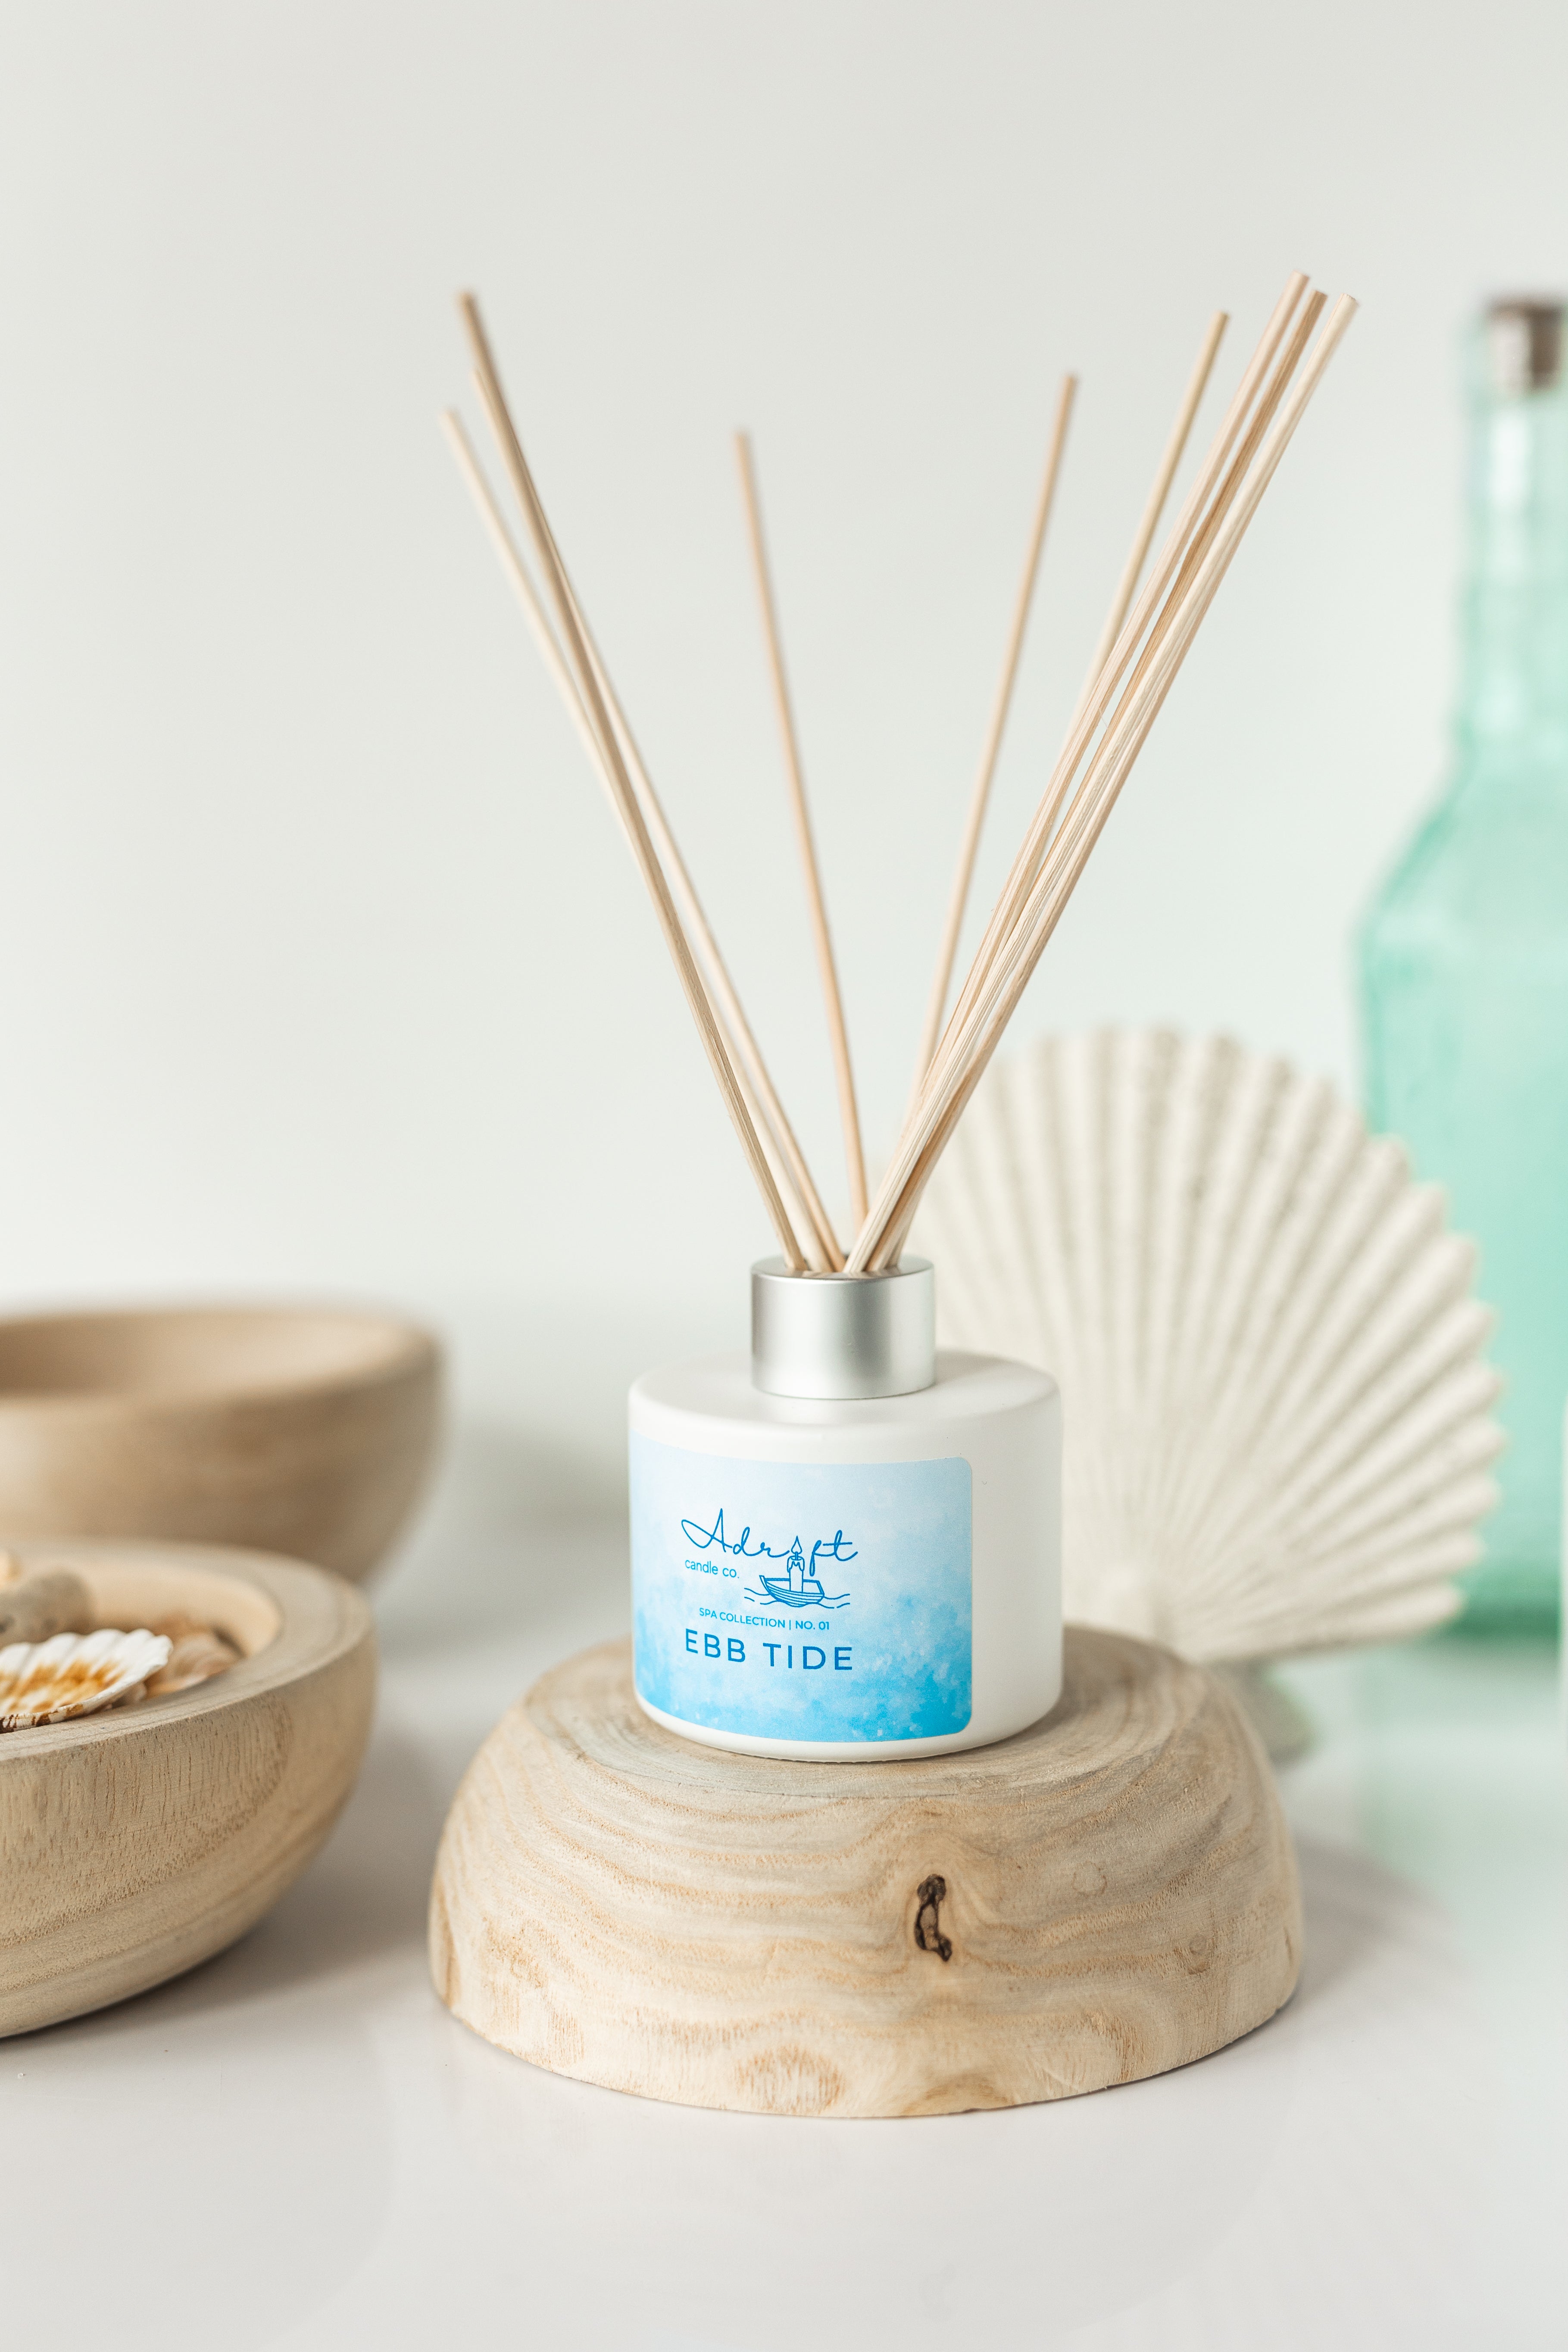 Adrift Candle Co. coastal themed reed diffuser